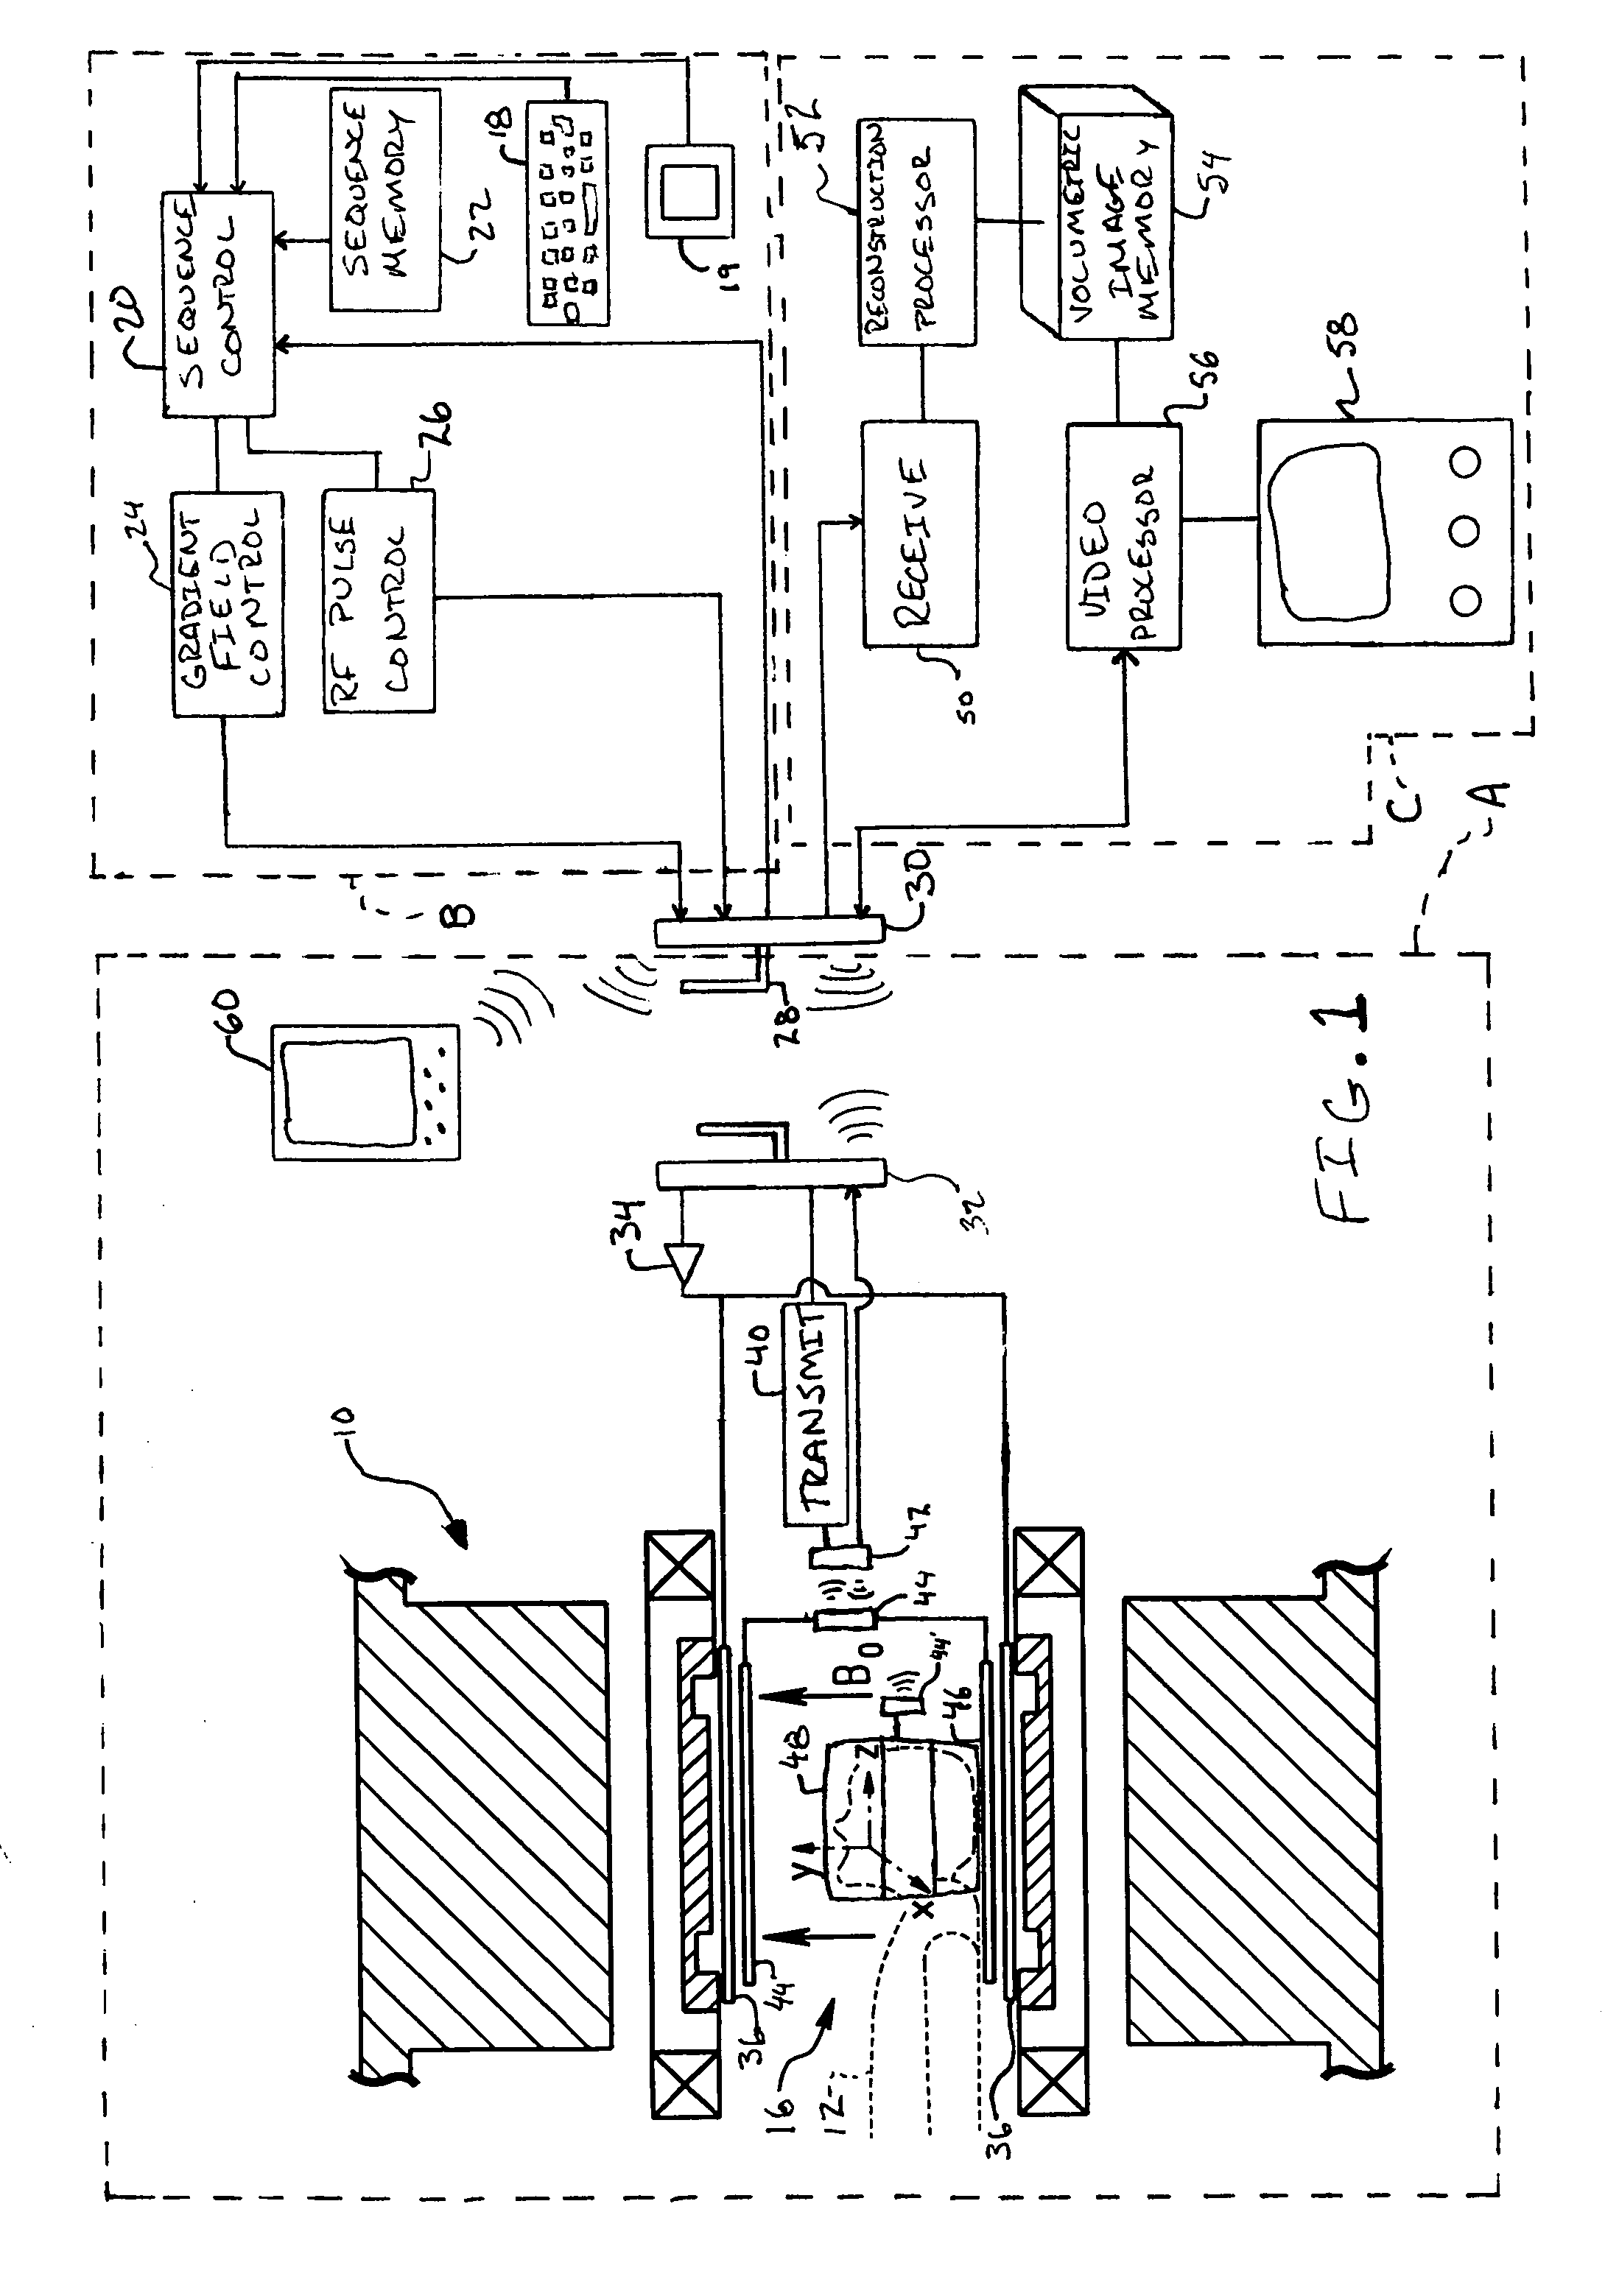 Wireless controller and application interface for an MRI system